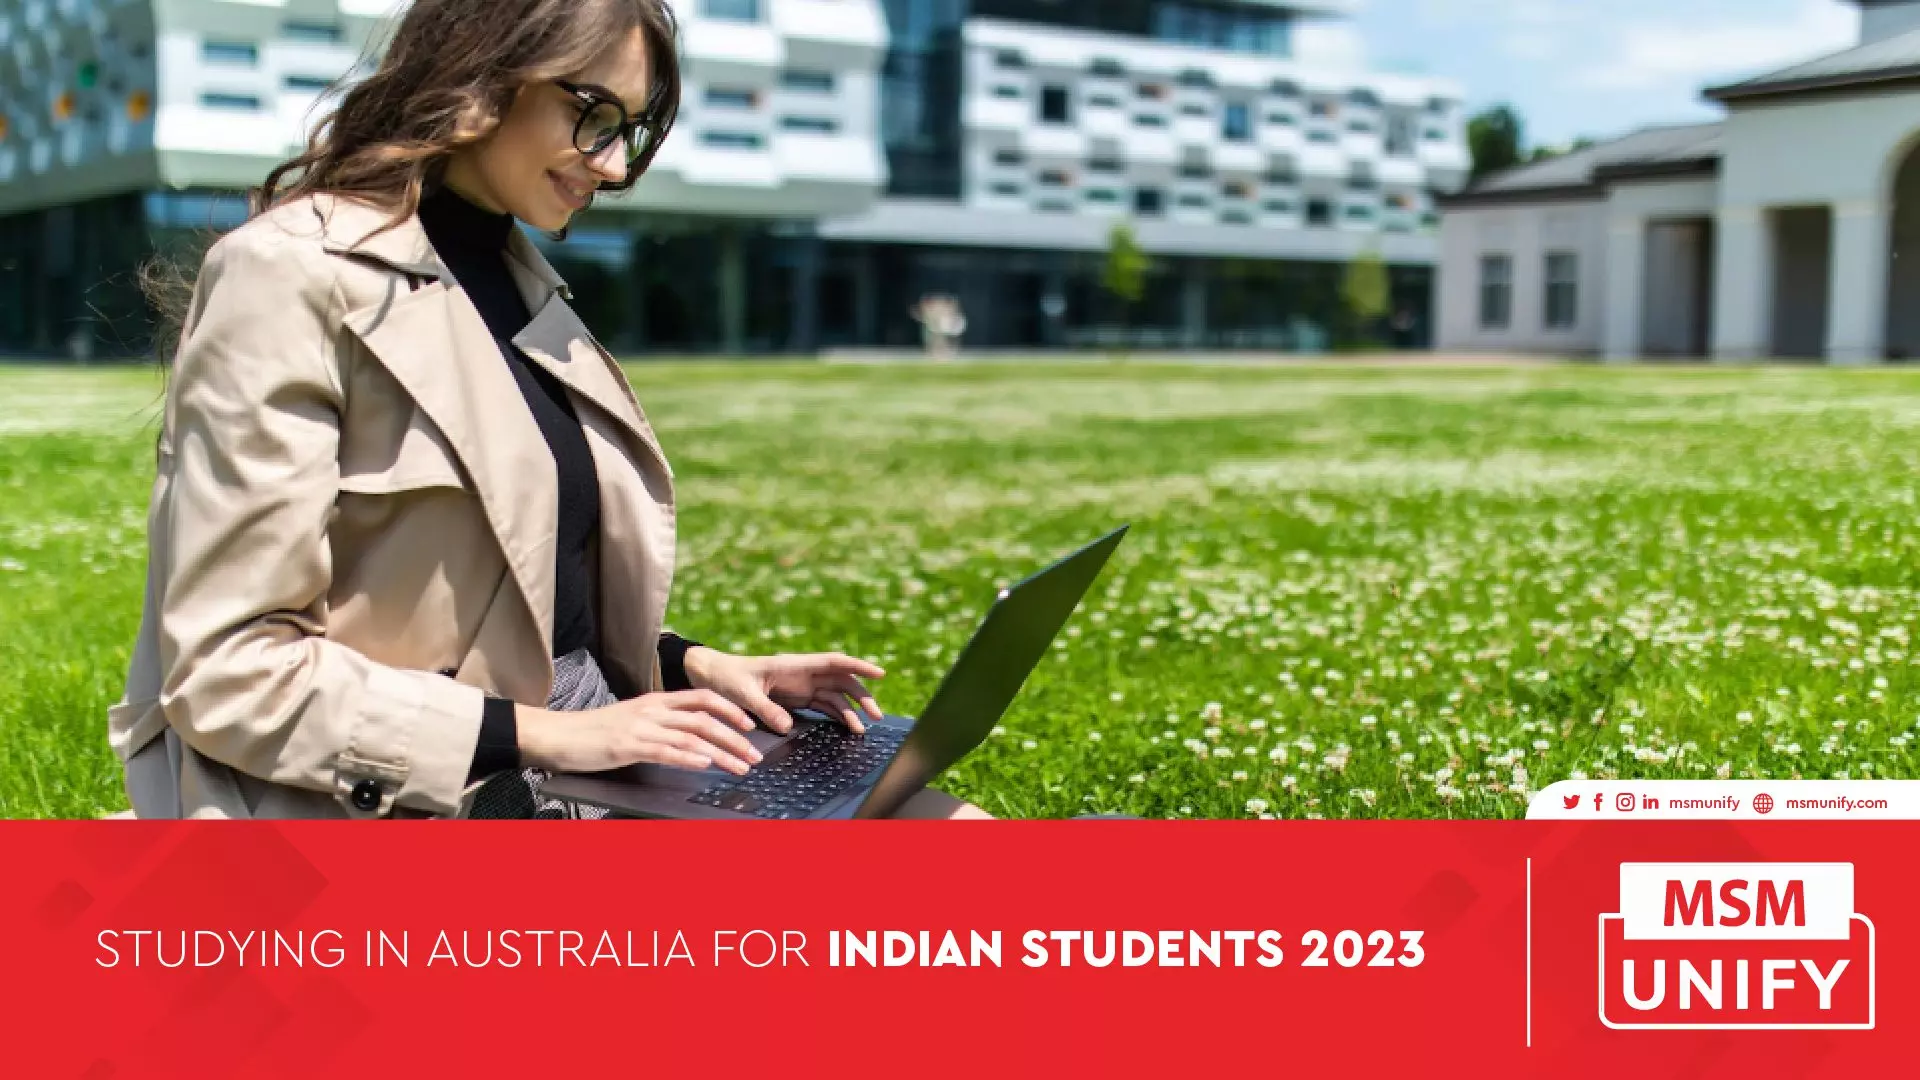 012023 MSM Unify Studying in Australia for Indian Students 2023 01